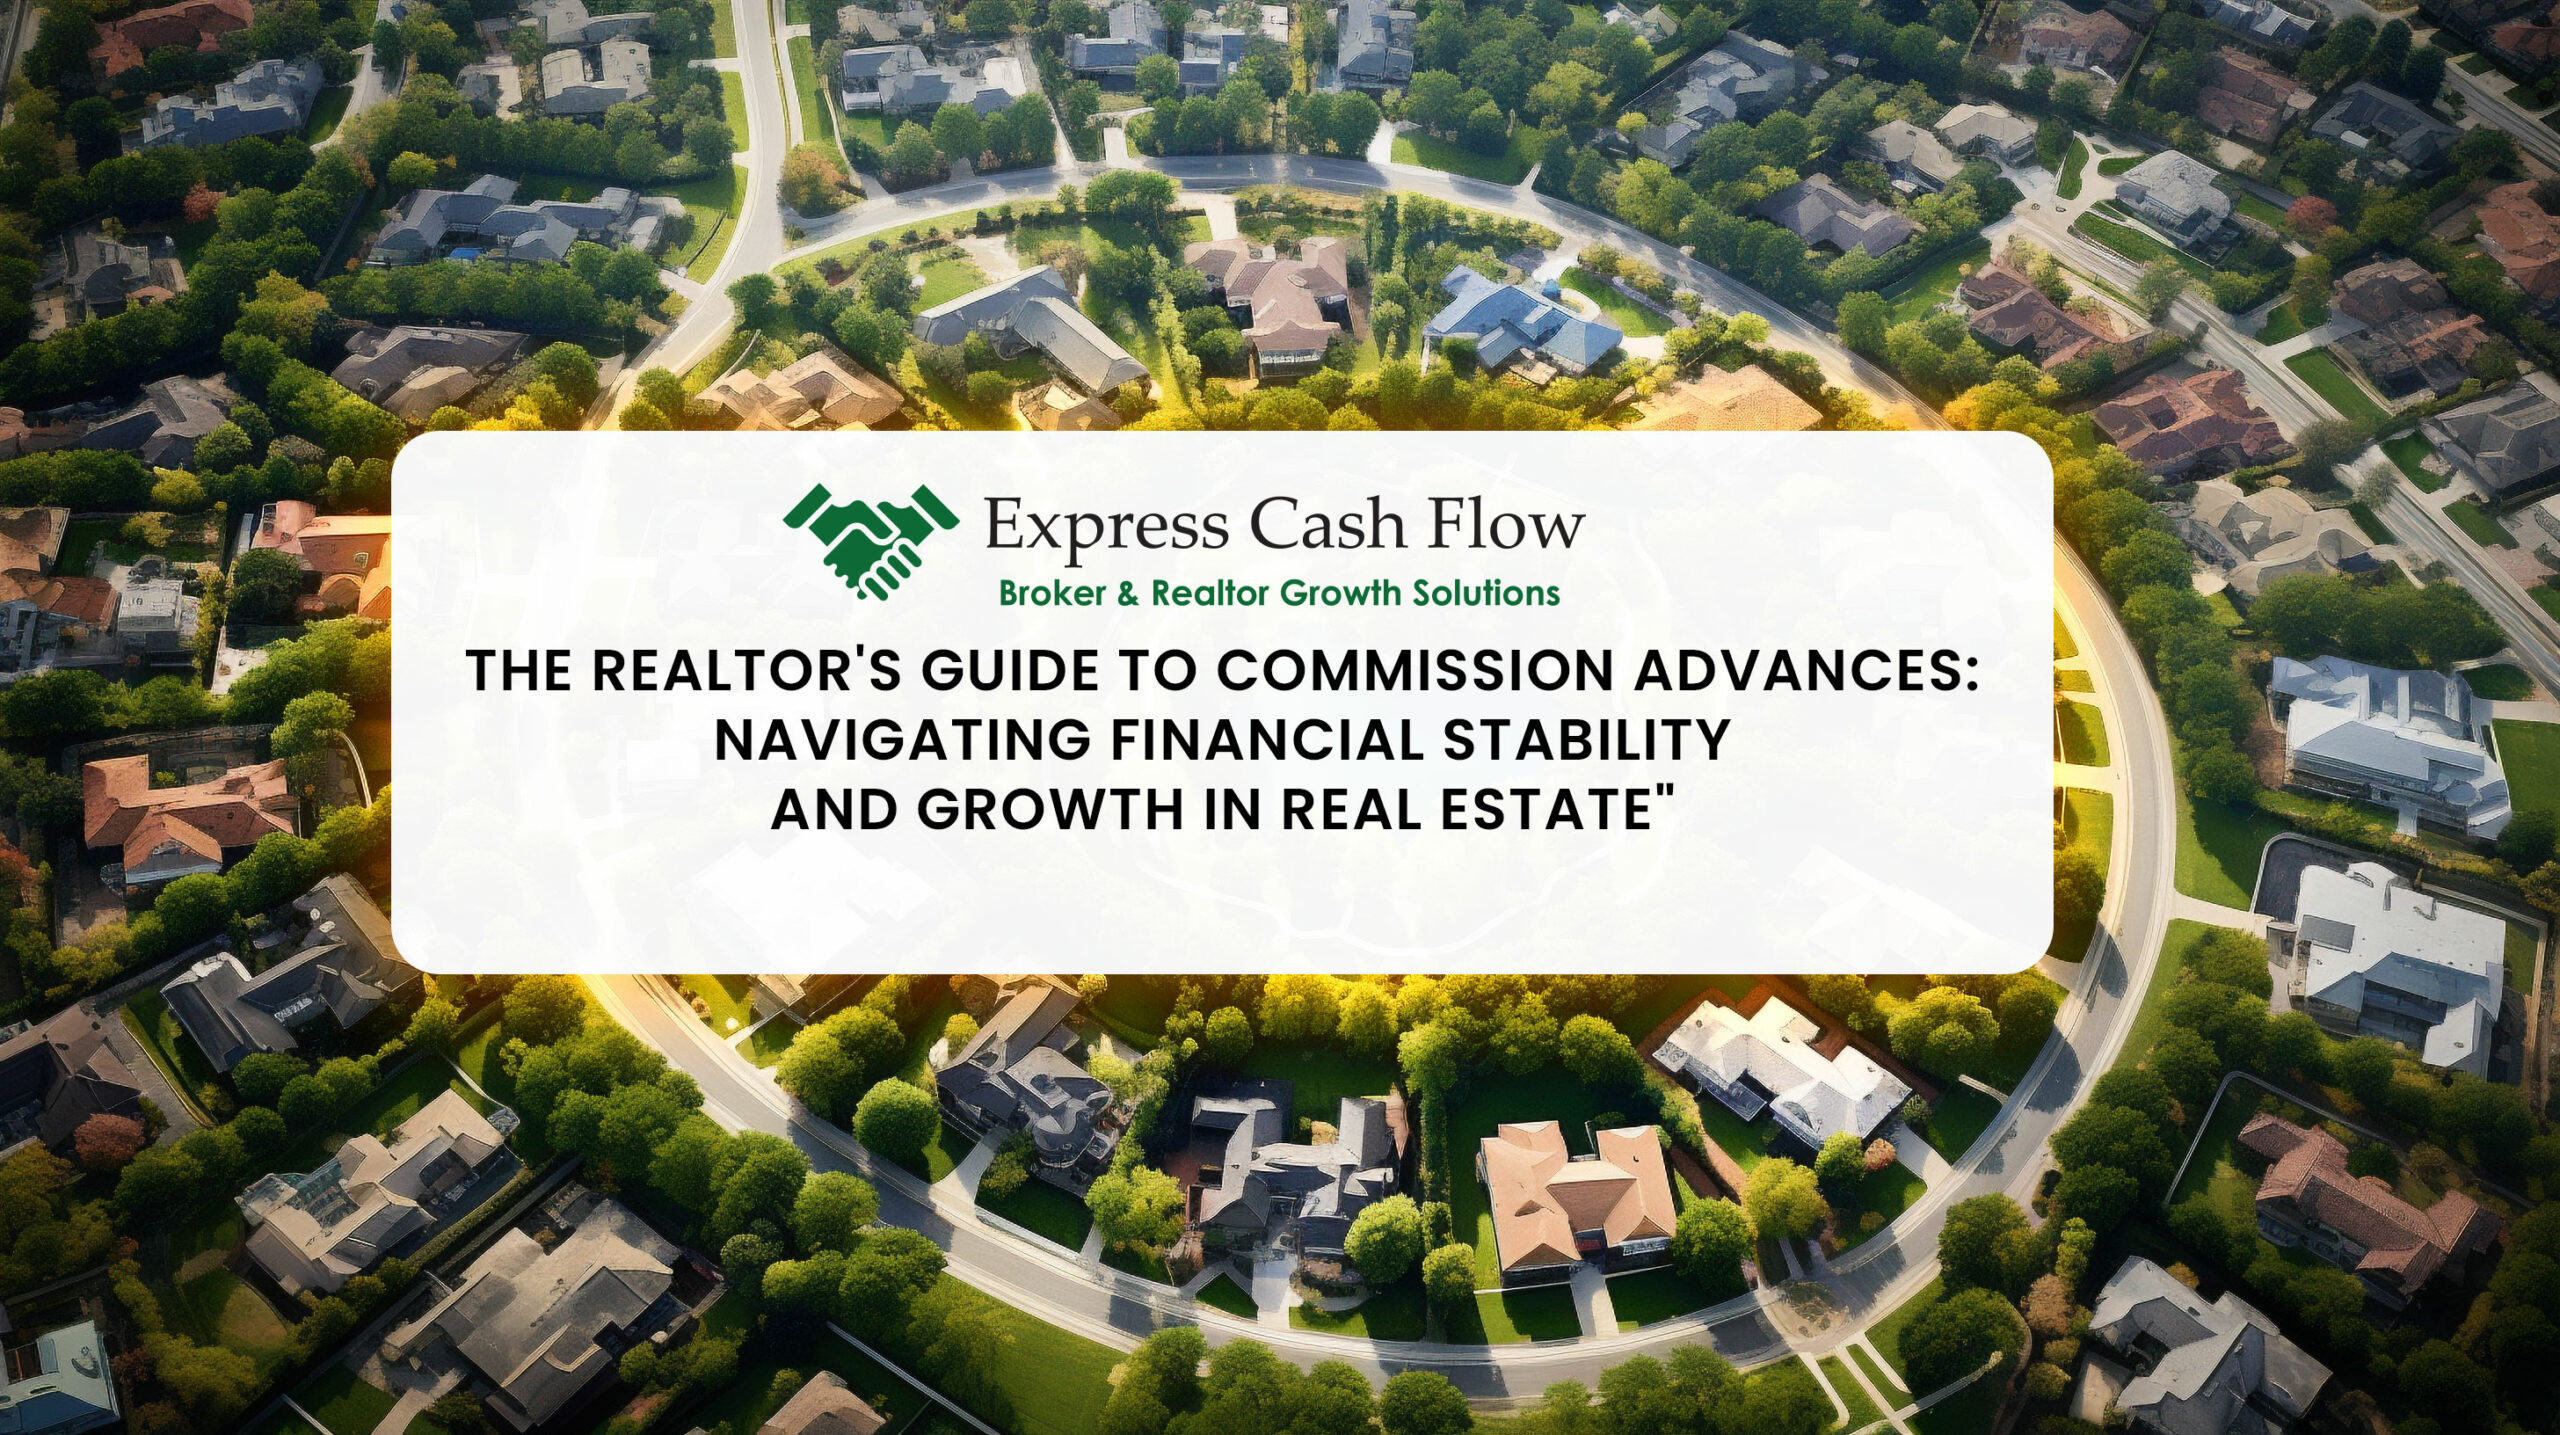 The-Realtor's-Guide-to-Commission-Advances--Navigating-Financial-Stability-and-Growth-in-Real-Estate'